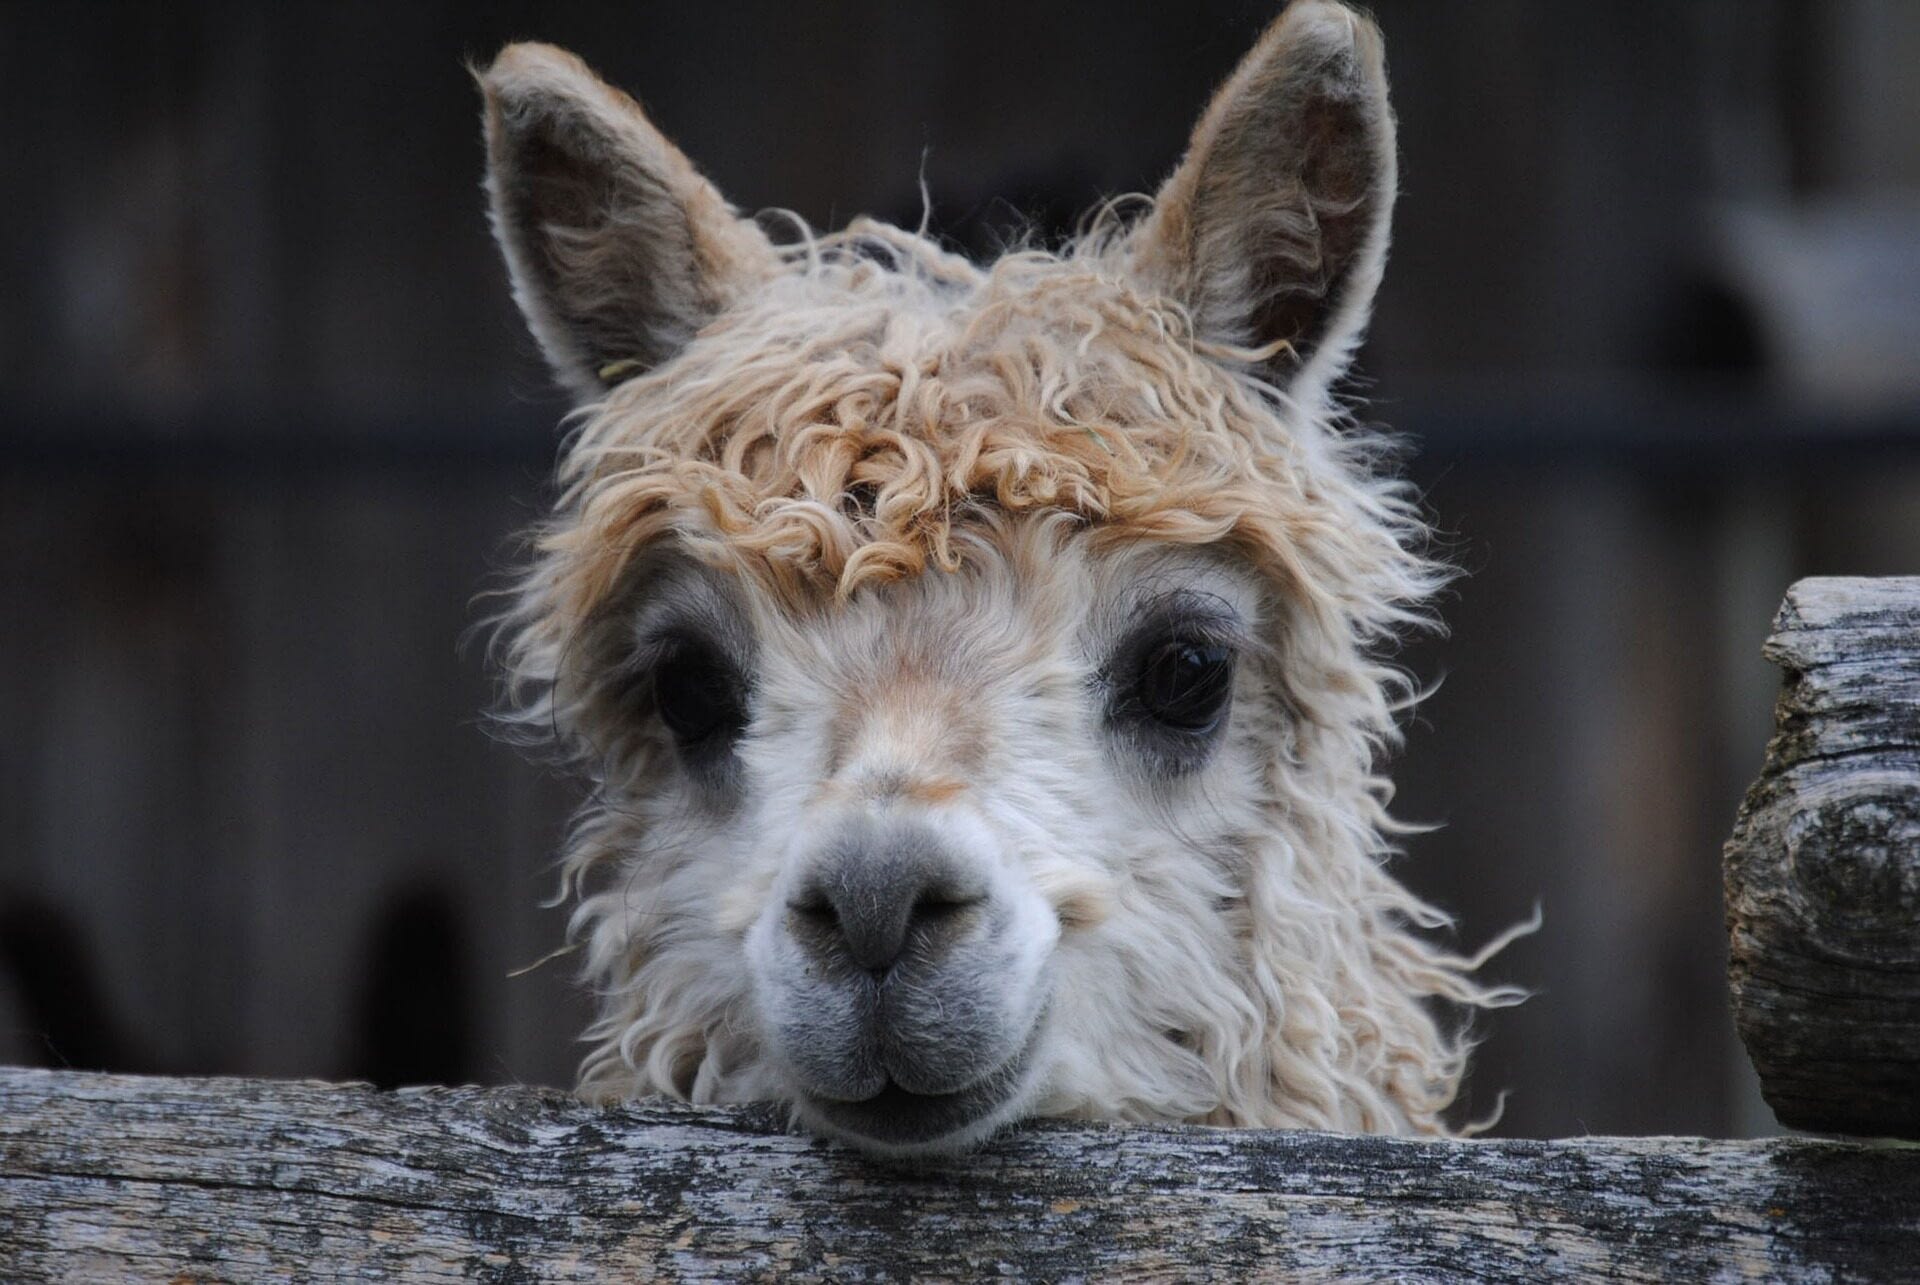 Image: White and blonde alpaca looking at camera